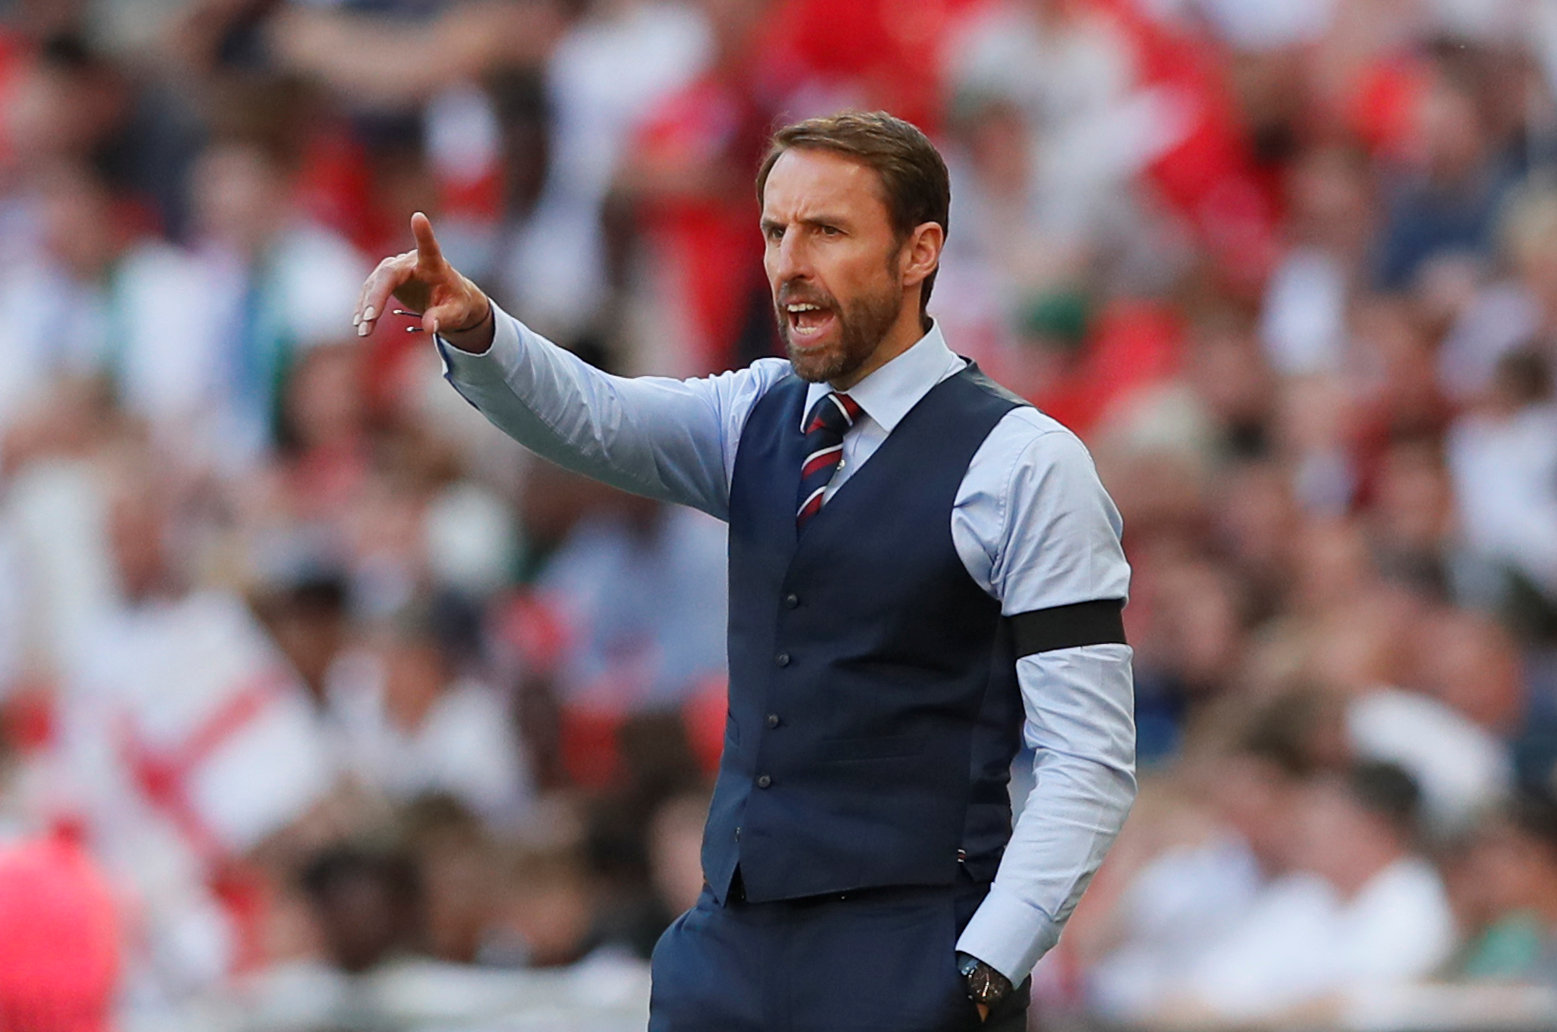 Football: Southgate purrs as England find attacking form